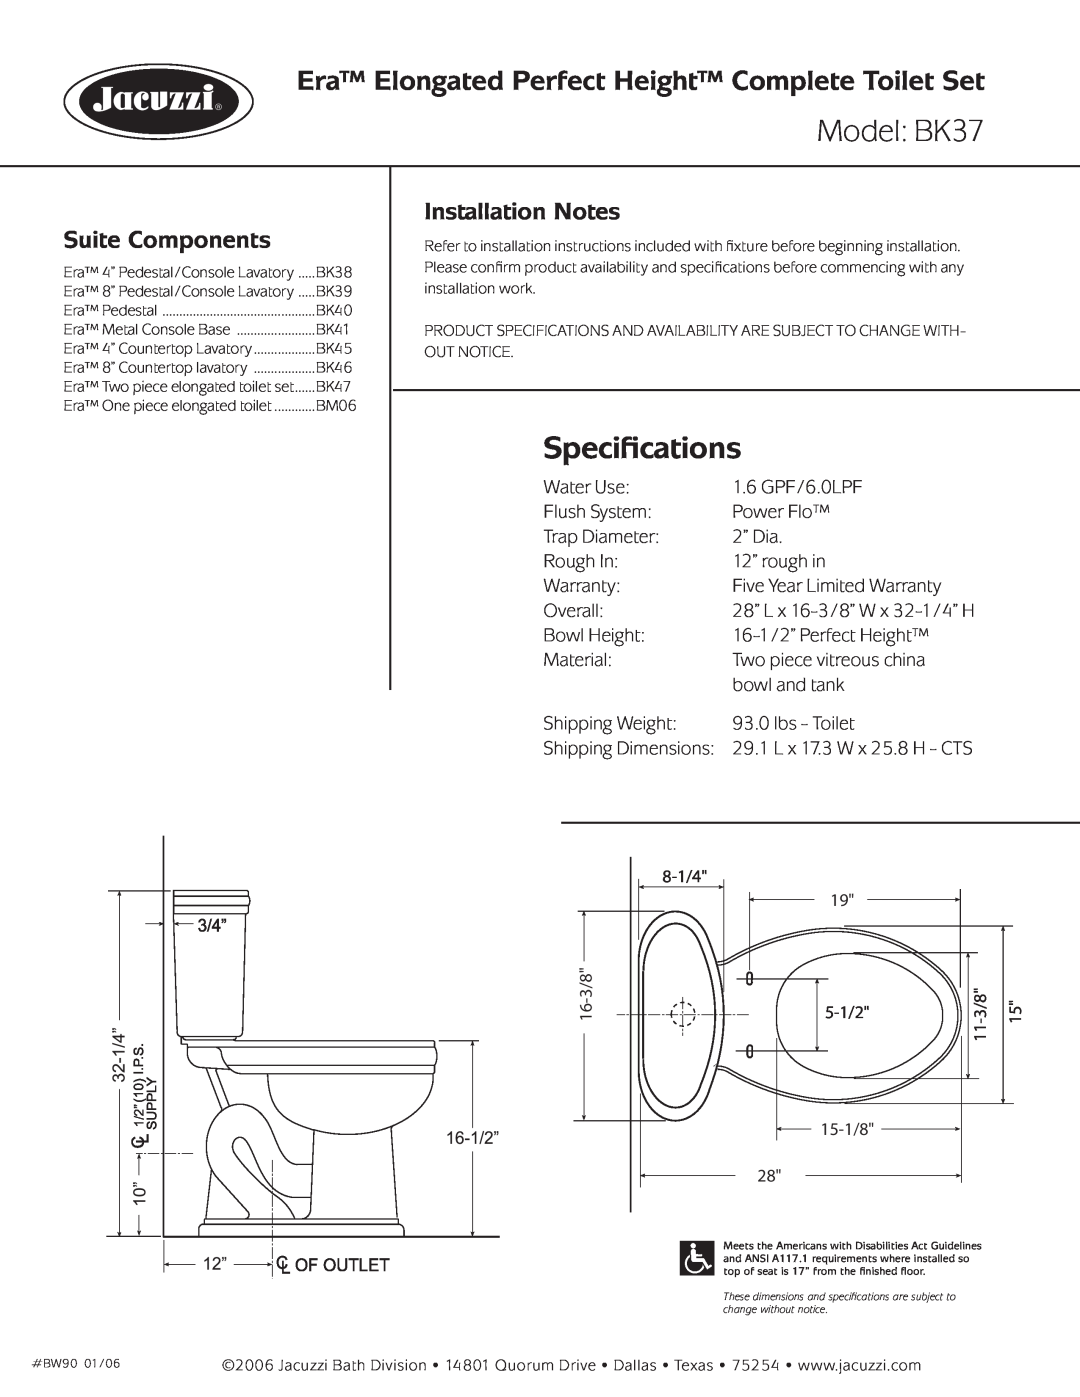 Jacuzzi dimensions Model BK37, Speciﬁcations, Era Elongated Perfect Height Complete Toilet Set, Suite Components 